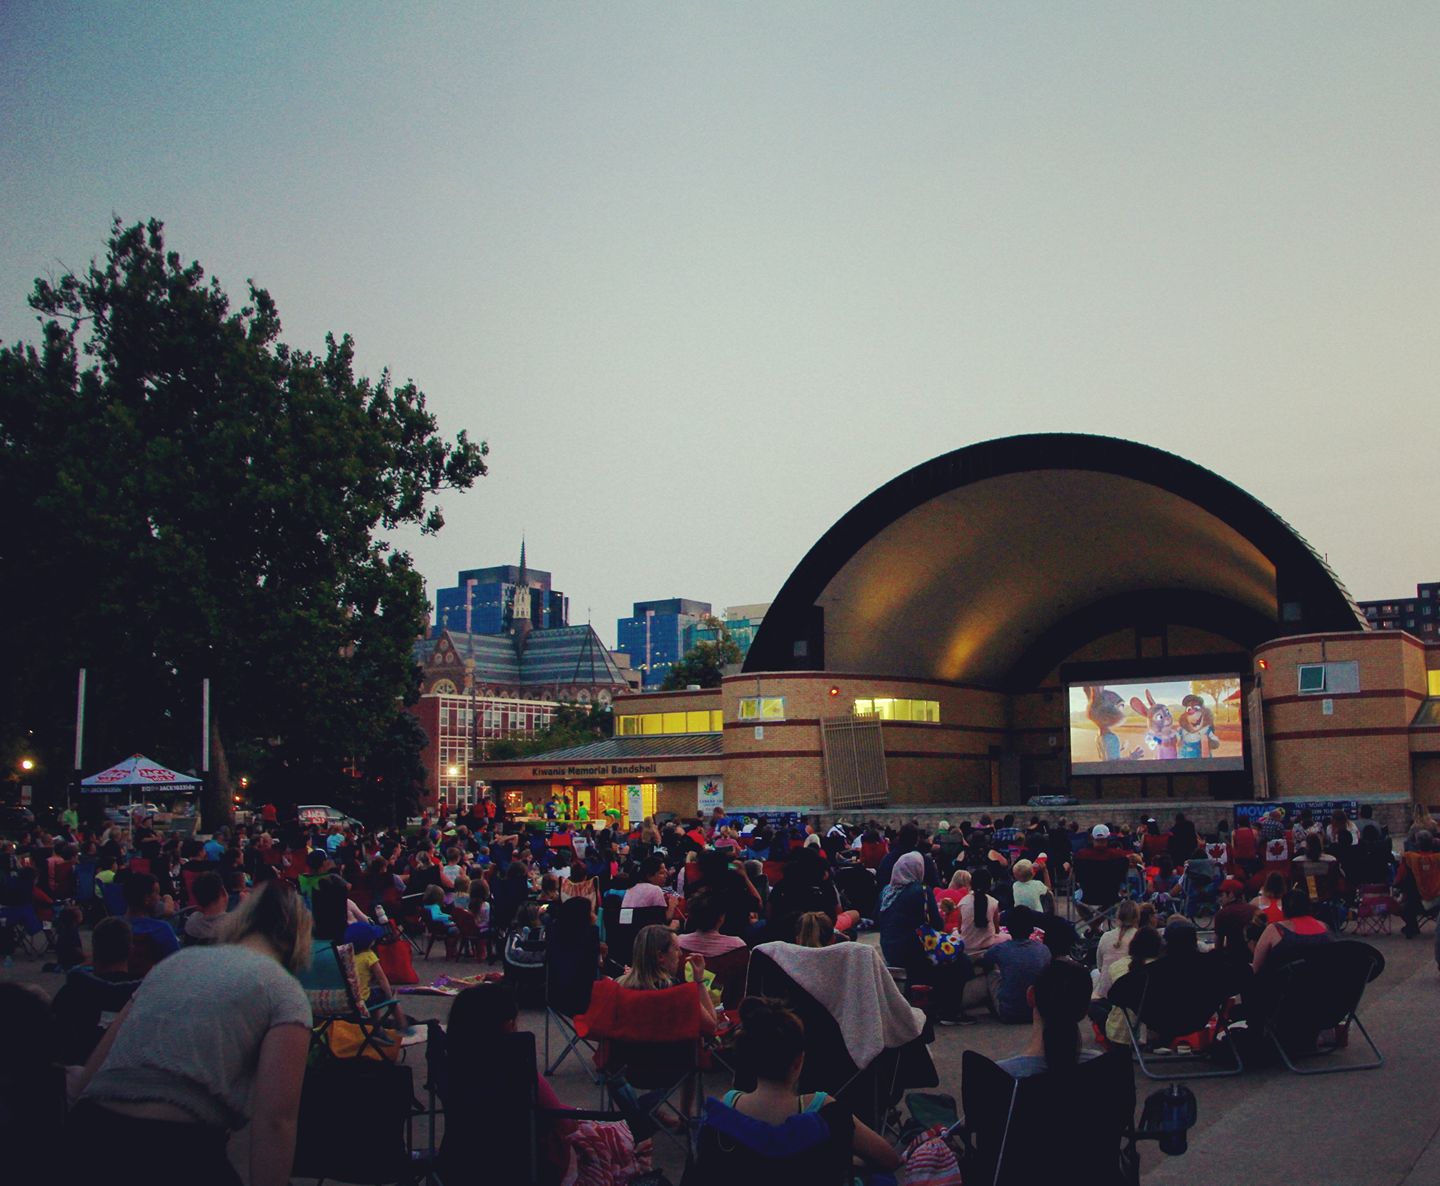 victoria park bandshell with full audience at dusk waiting for movie night